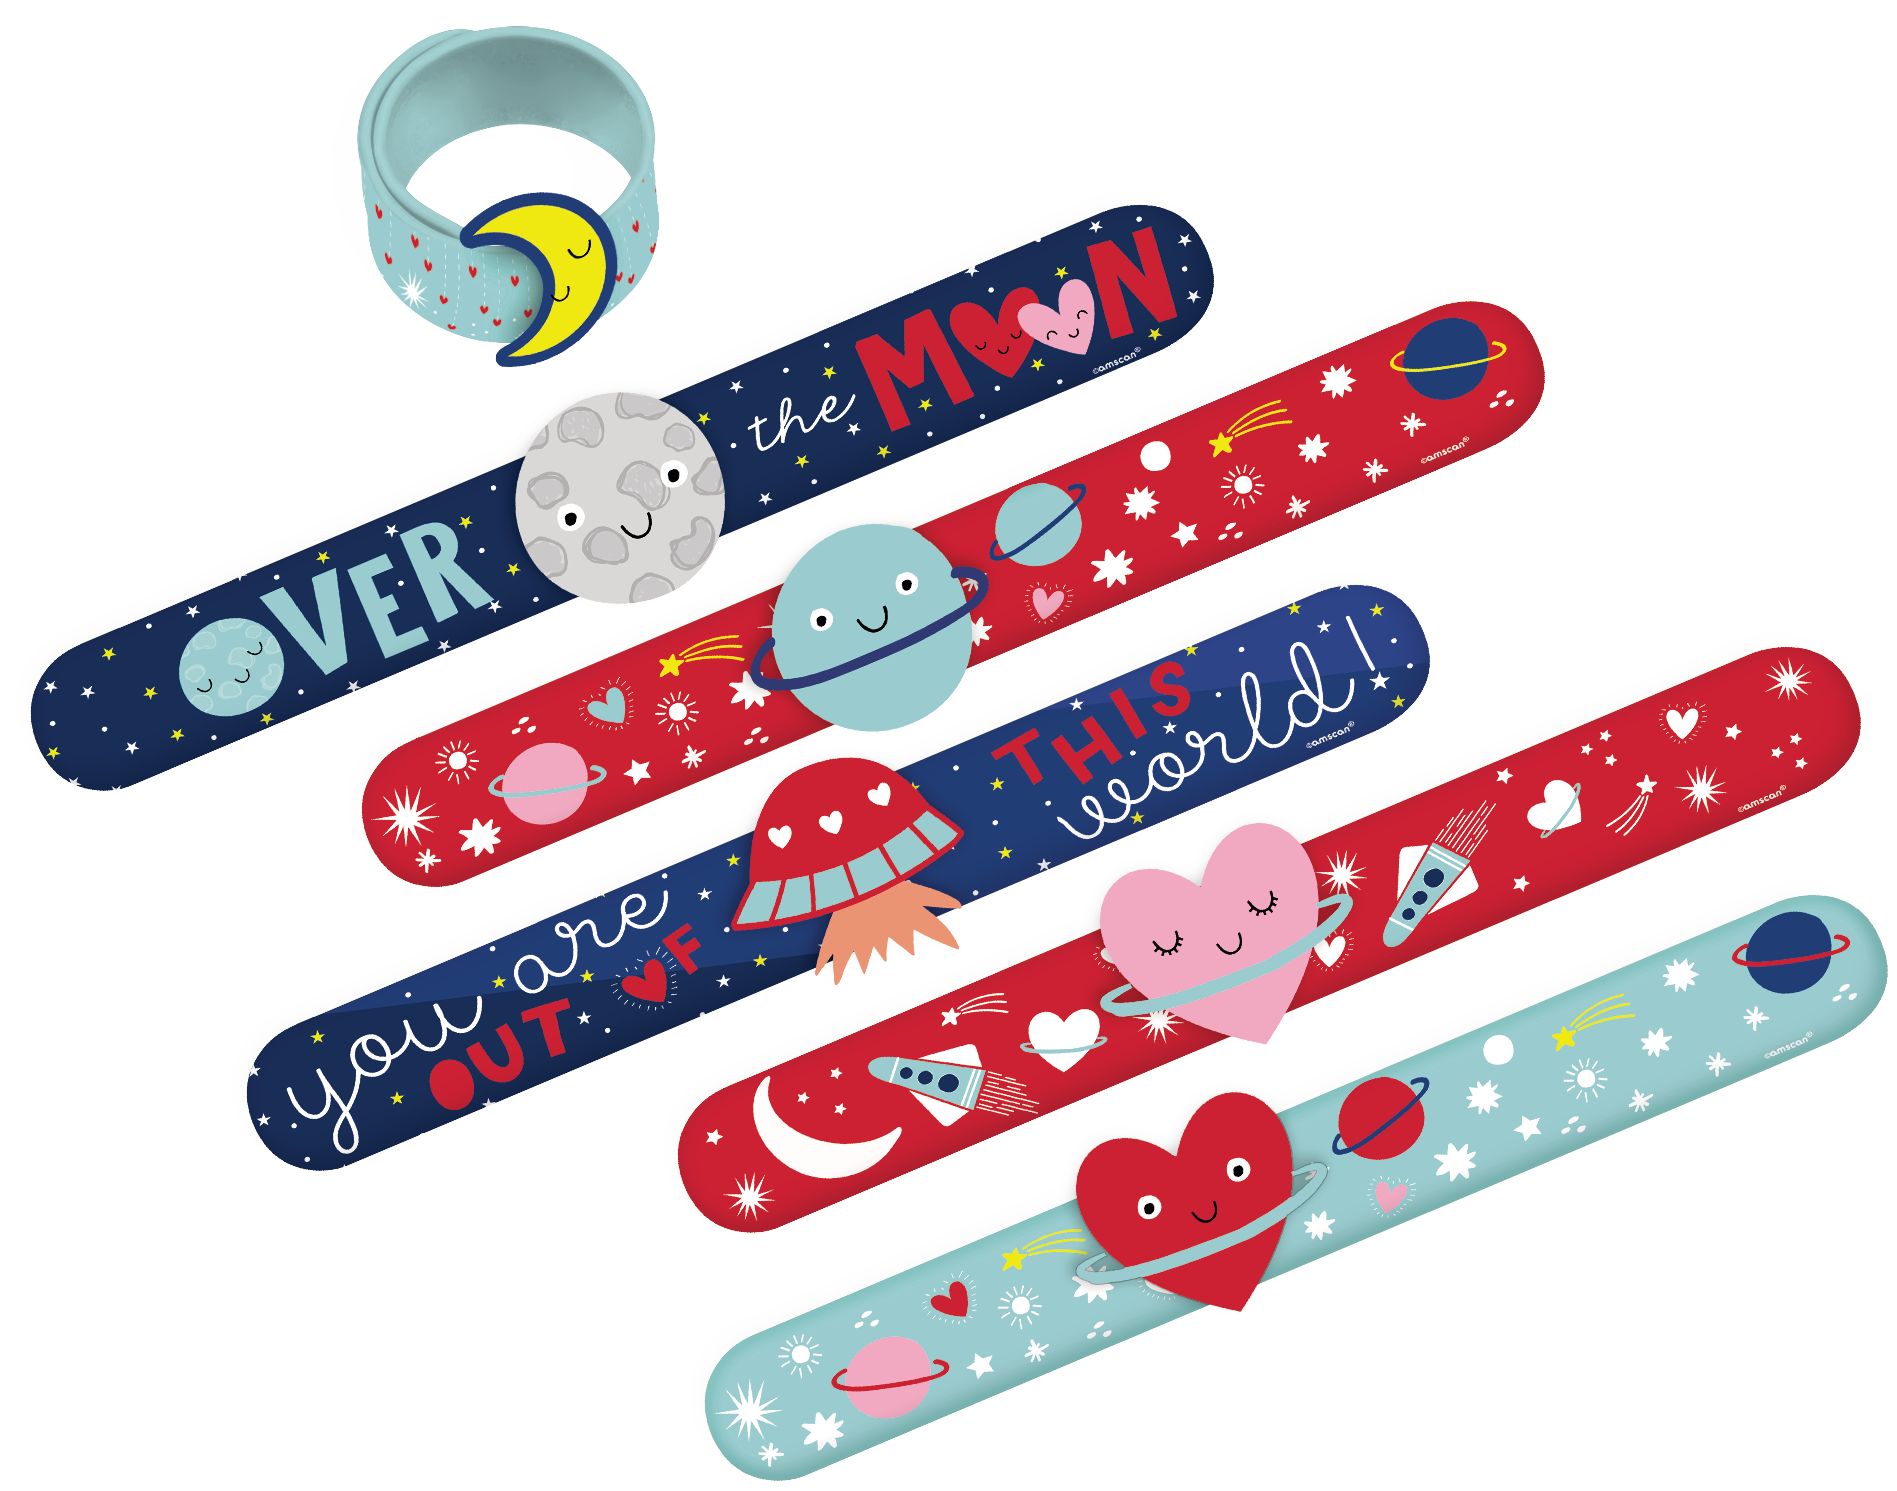 Avengers Slap Bands | Kids party supplies, Kids gifts, Kid party favors